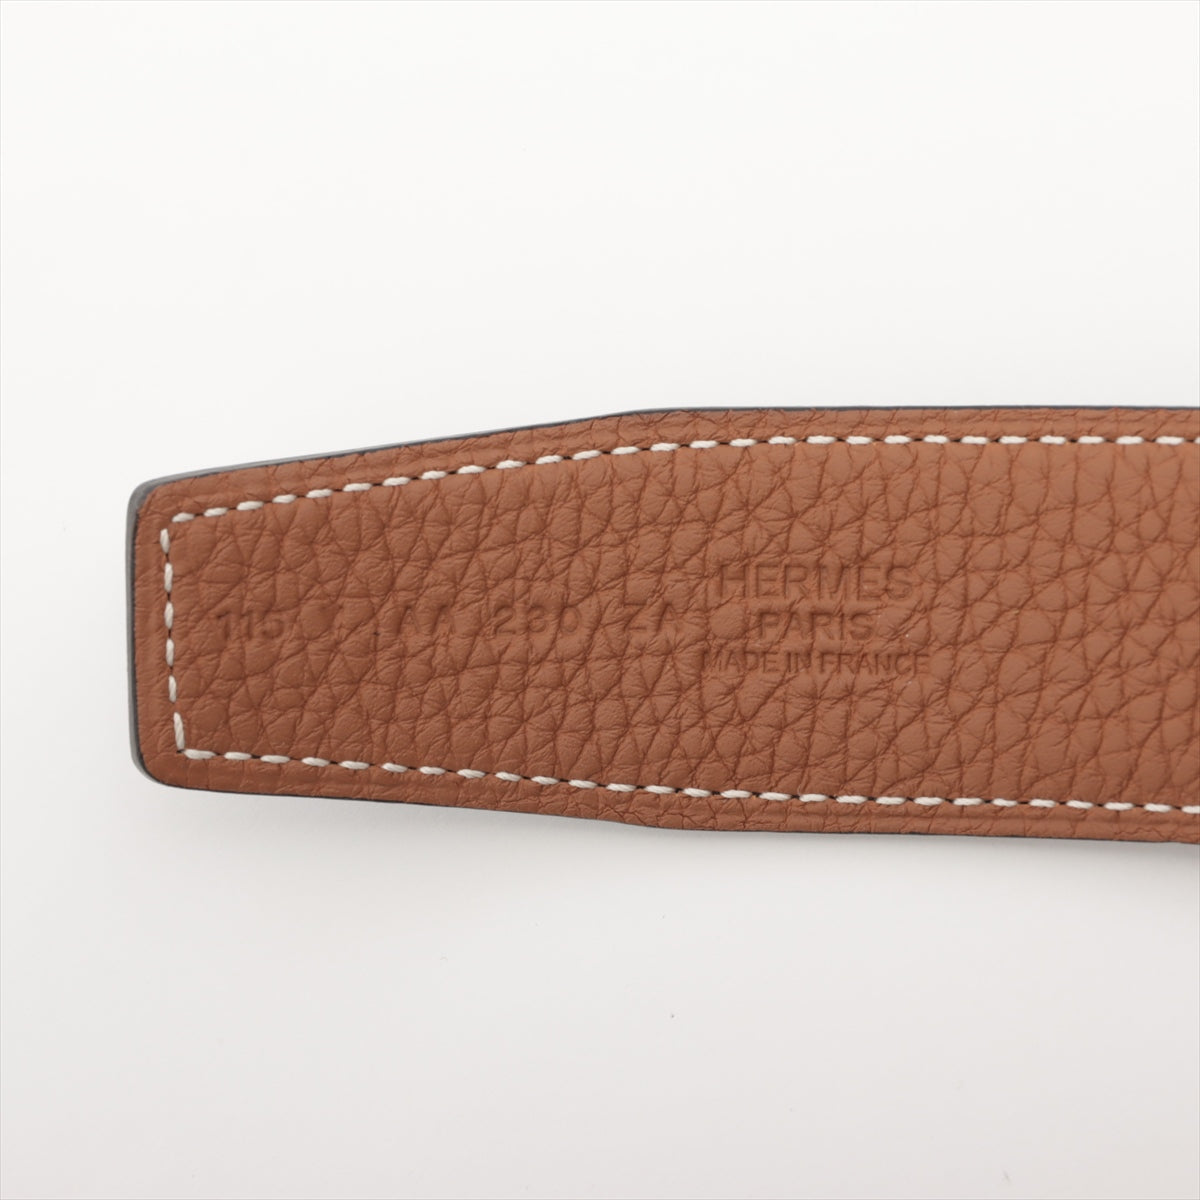 Hermès H Belt Y:2020 Belt 115 Leather Black Scratched Peeling Stained Discoloration With odor